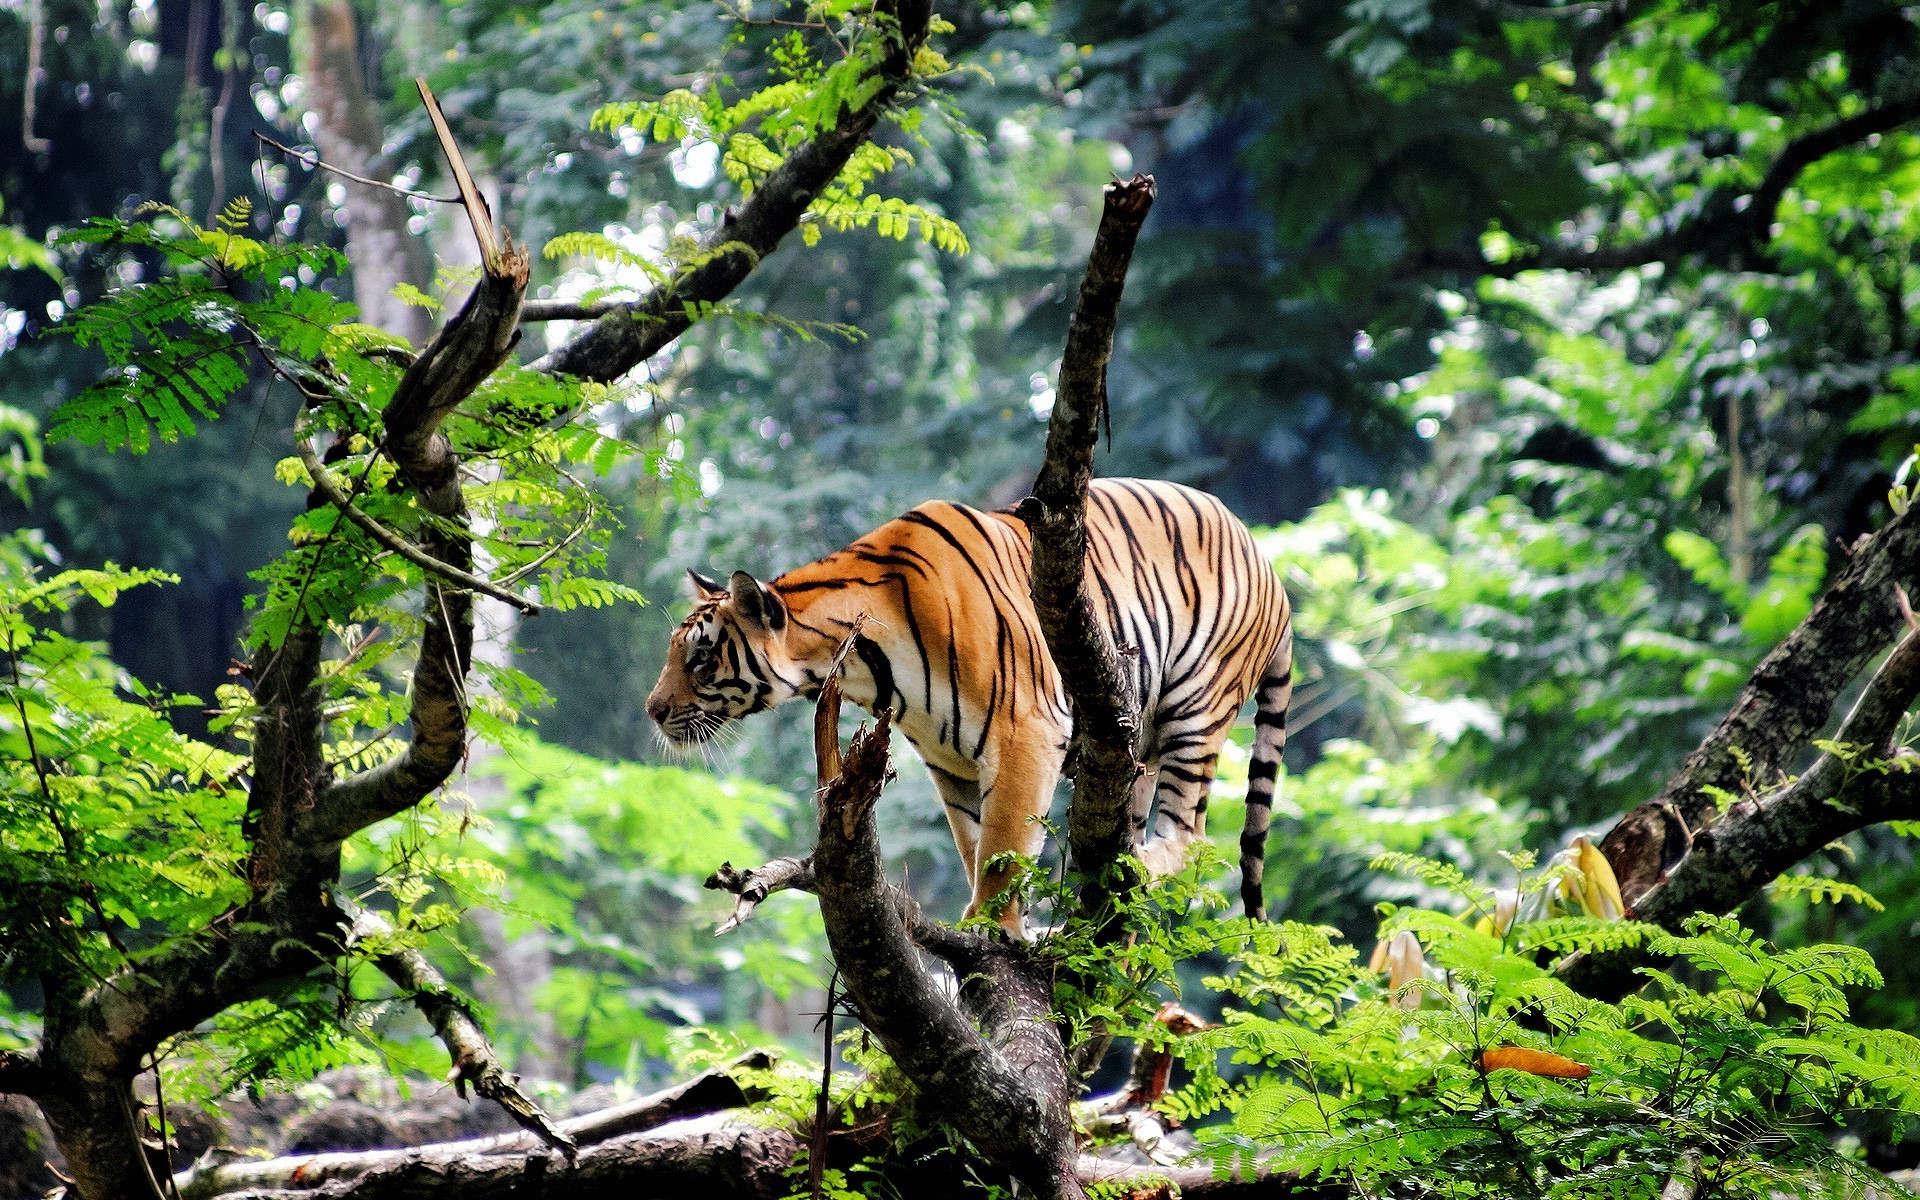 Wallpaper : trees, forest, animals, nature, plants, tiger, branch